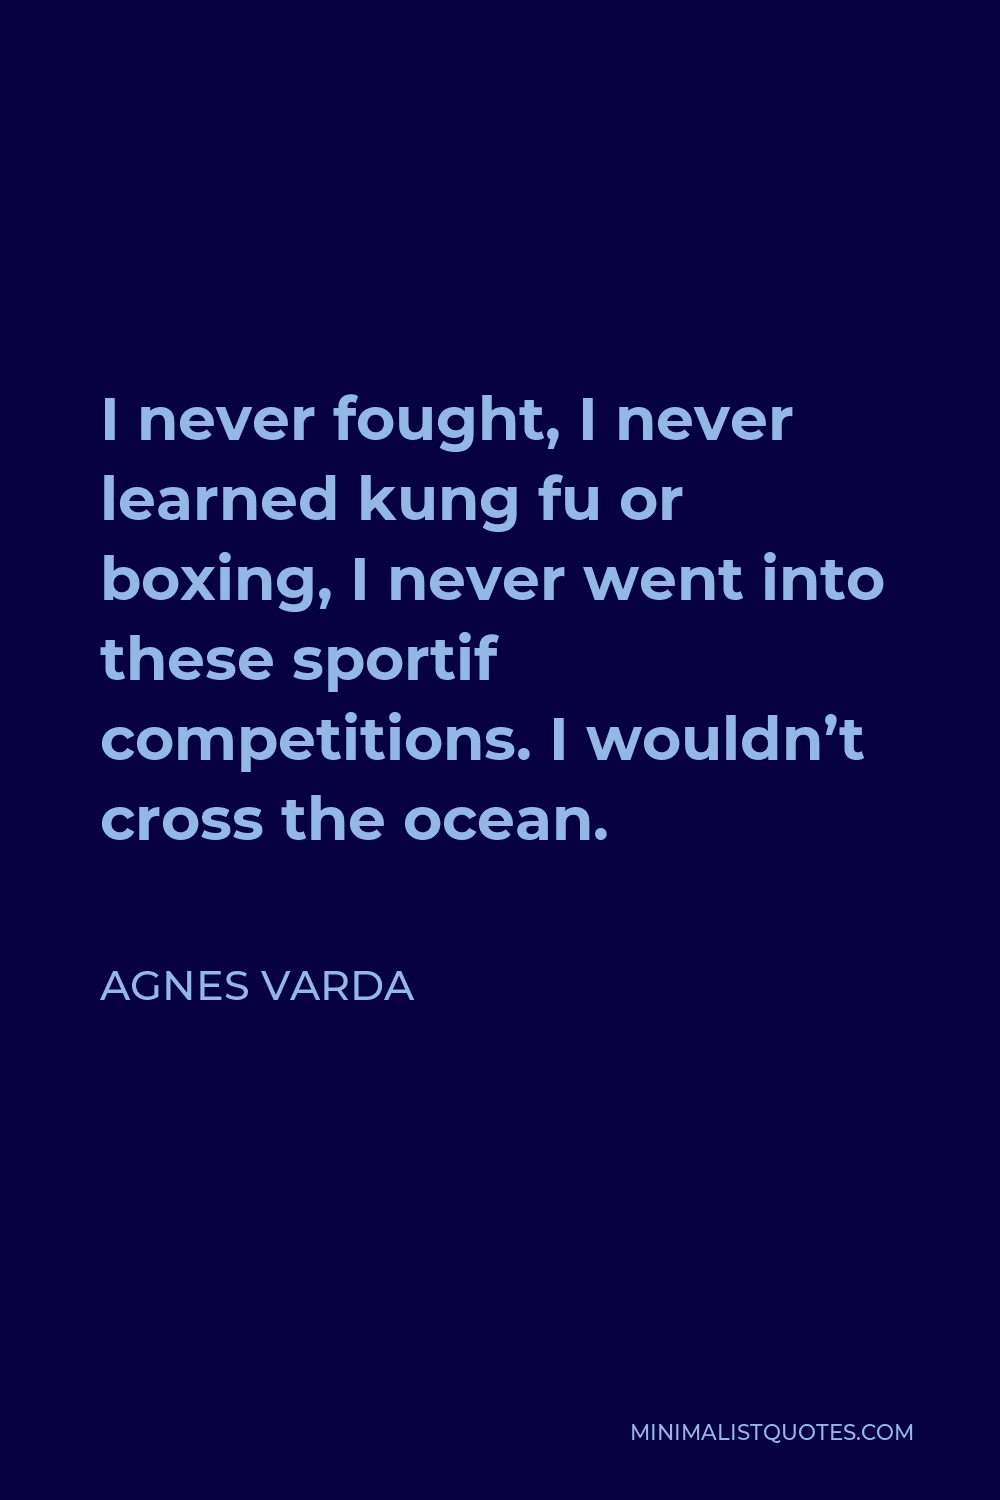 Agnes Varda Quote - I never fought, I never learned kung fu or boxing, I never went into these sportif competitions. I wouldn’t cross the ocean.